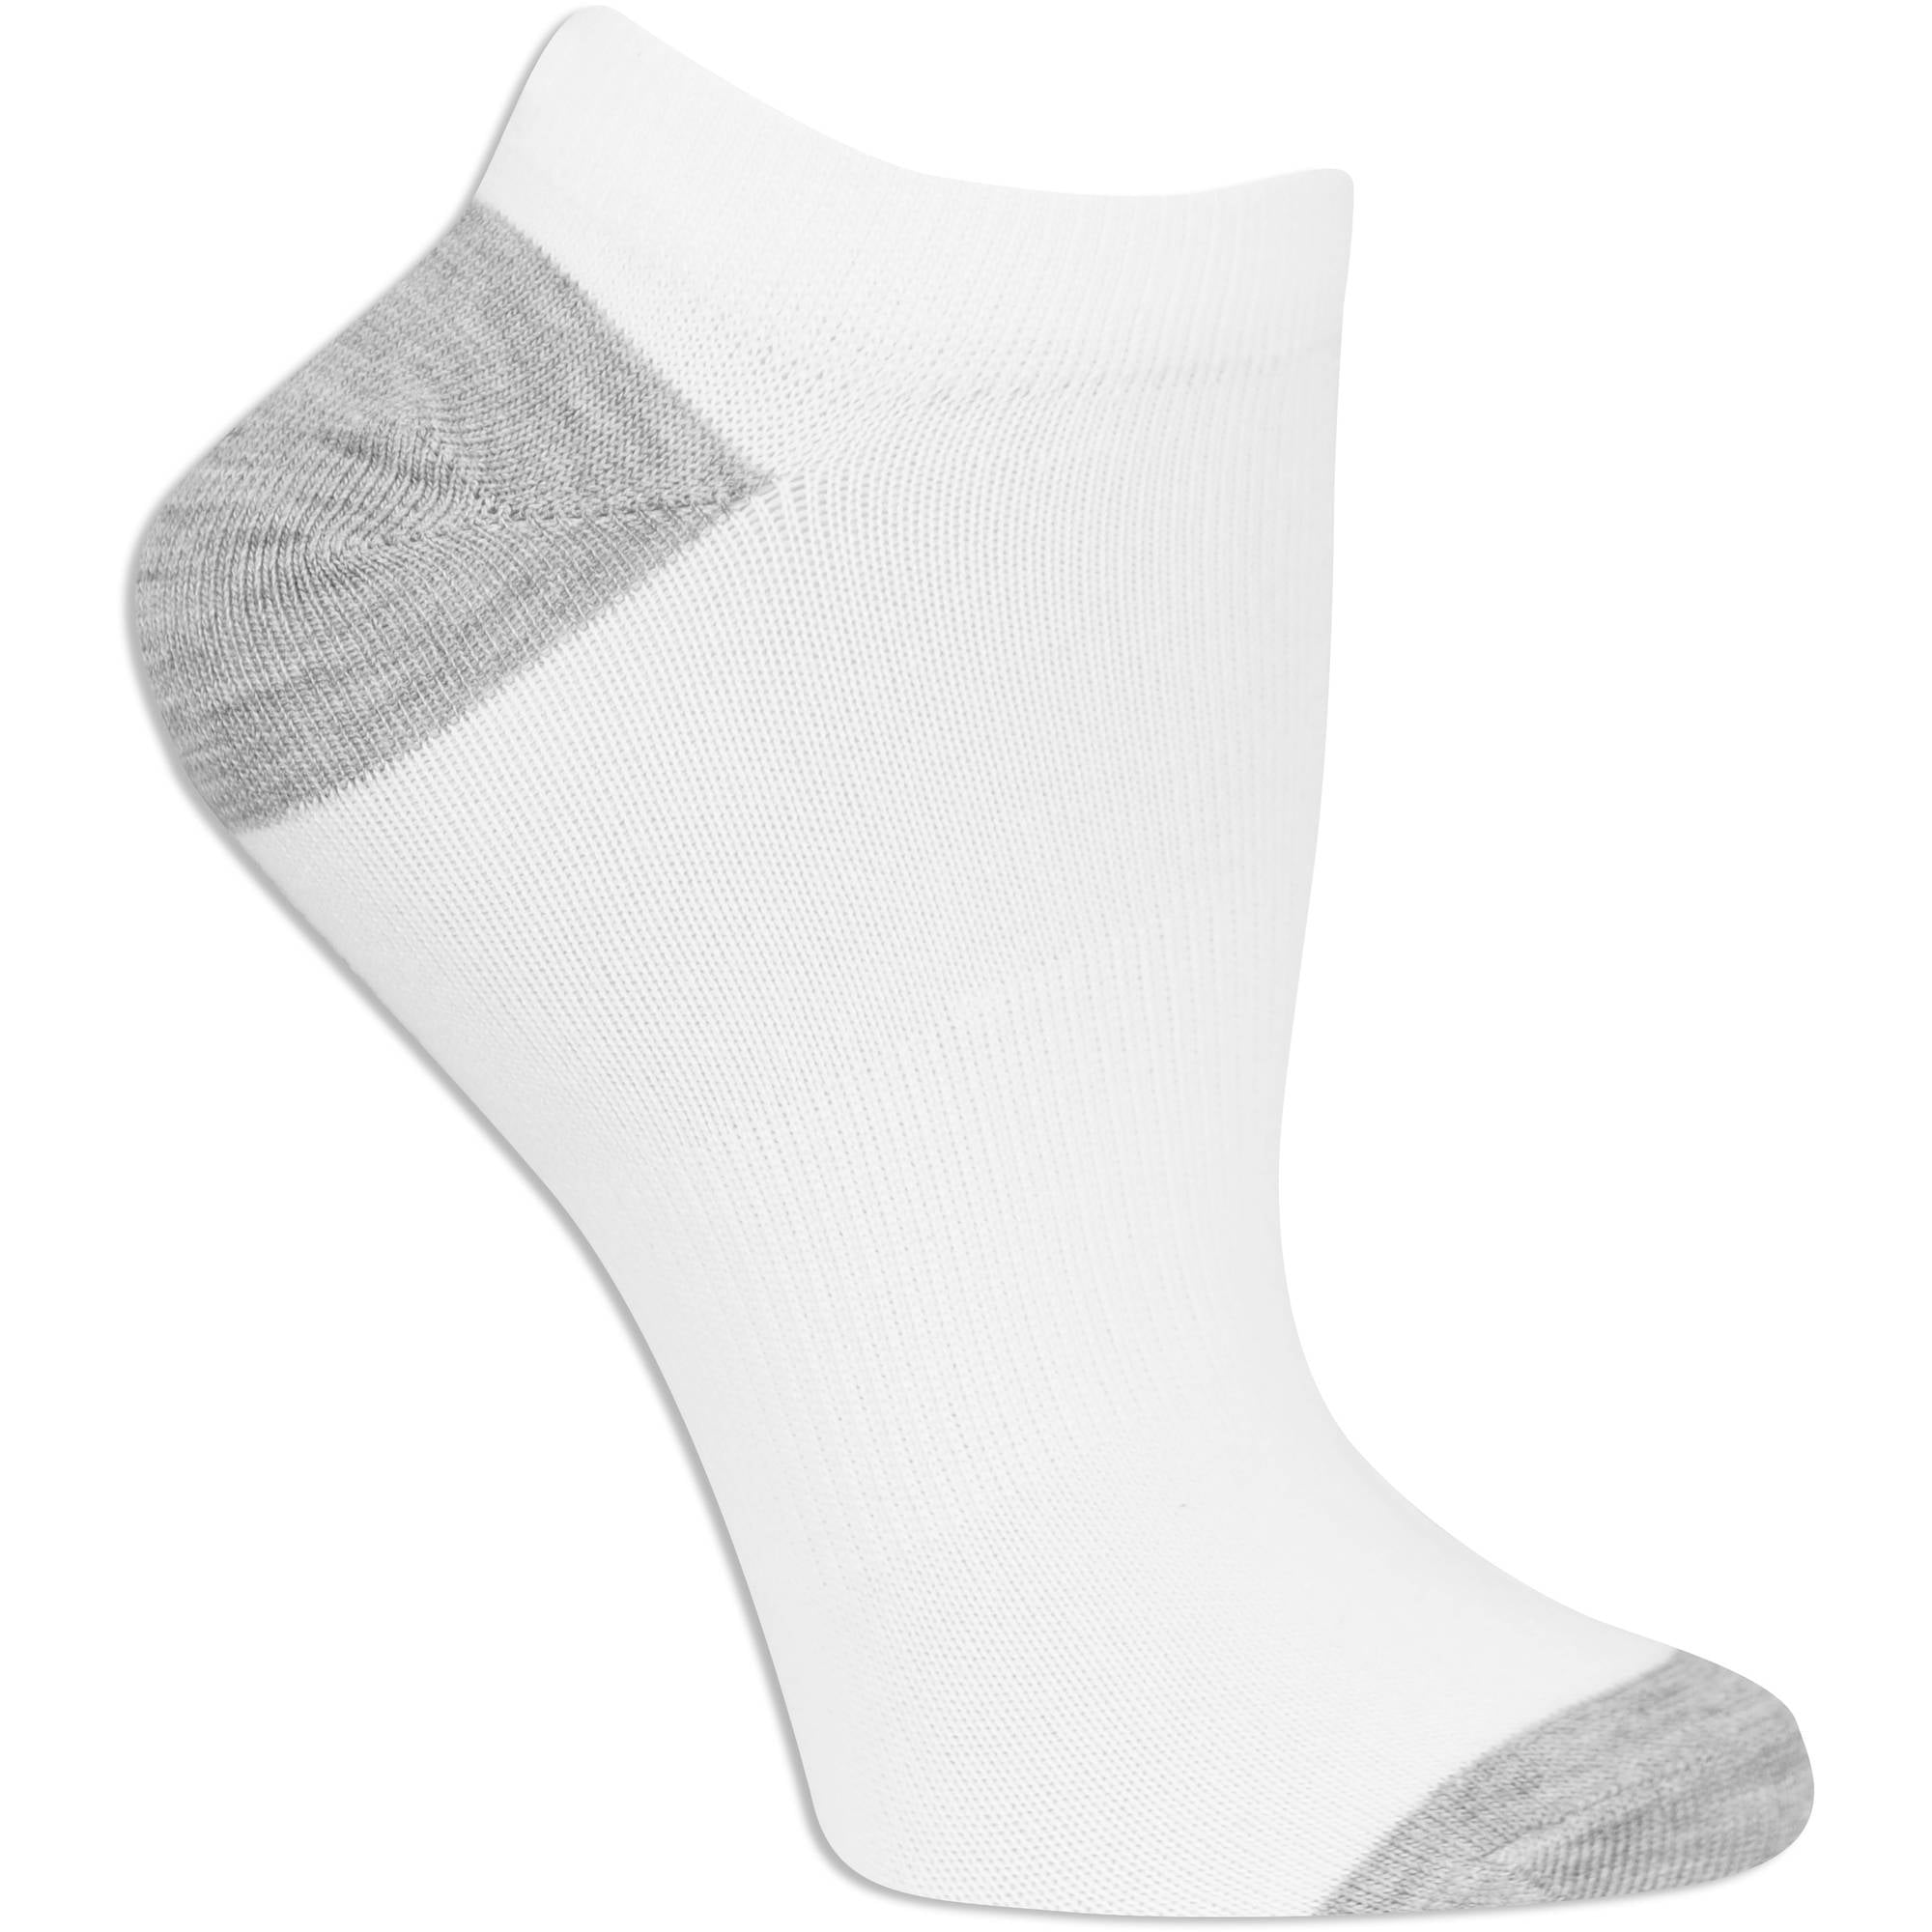 women's no show socks with arch support